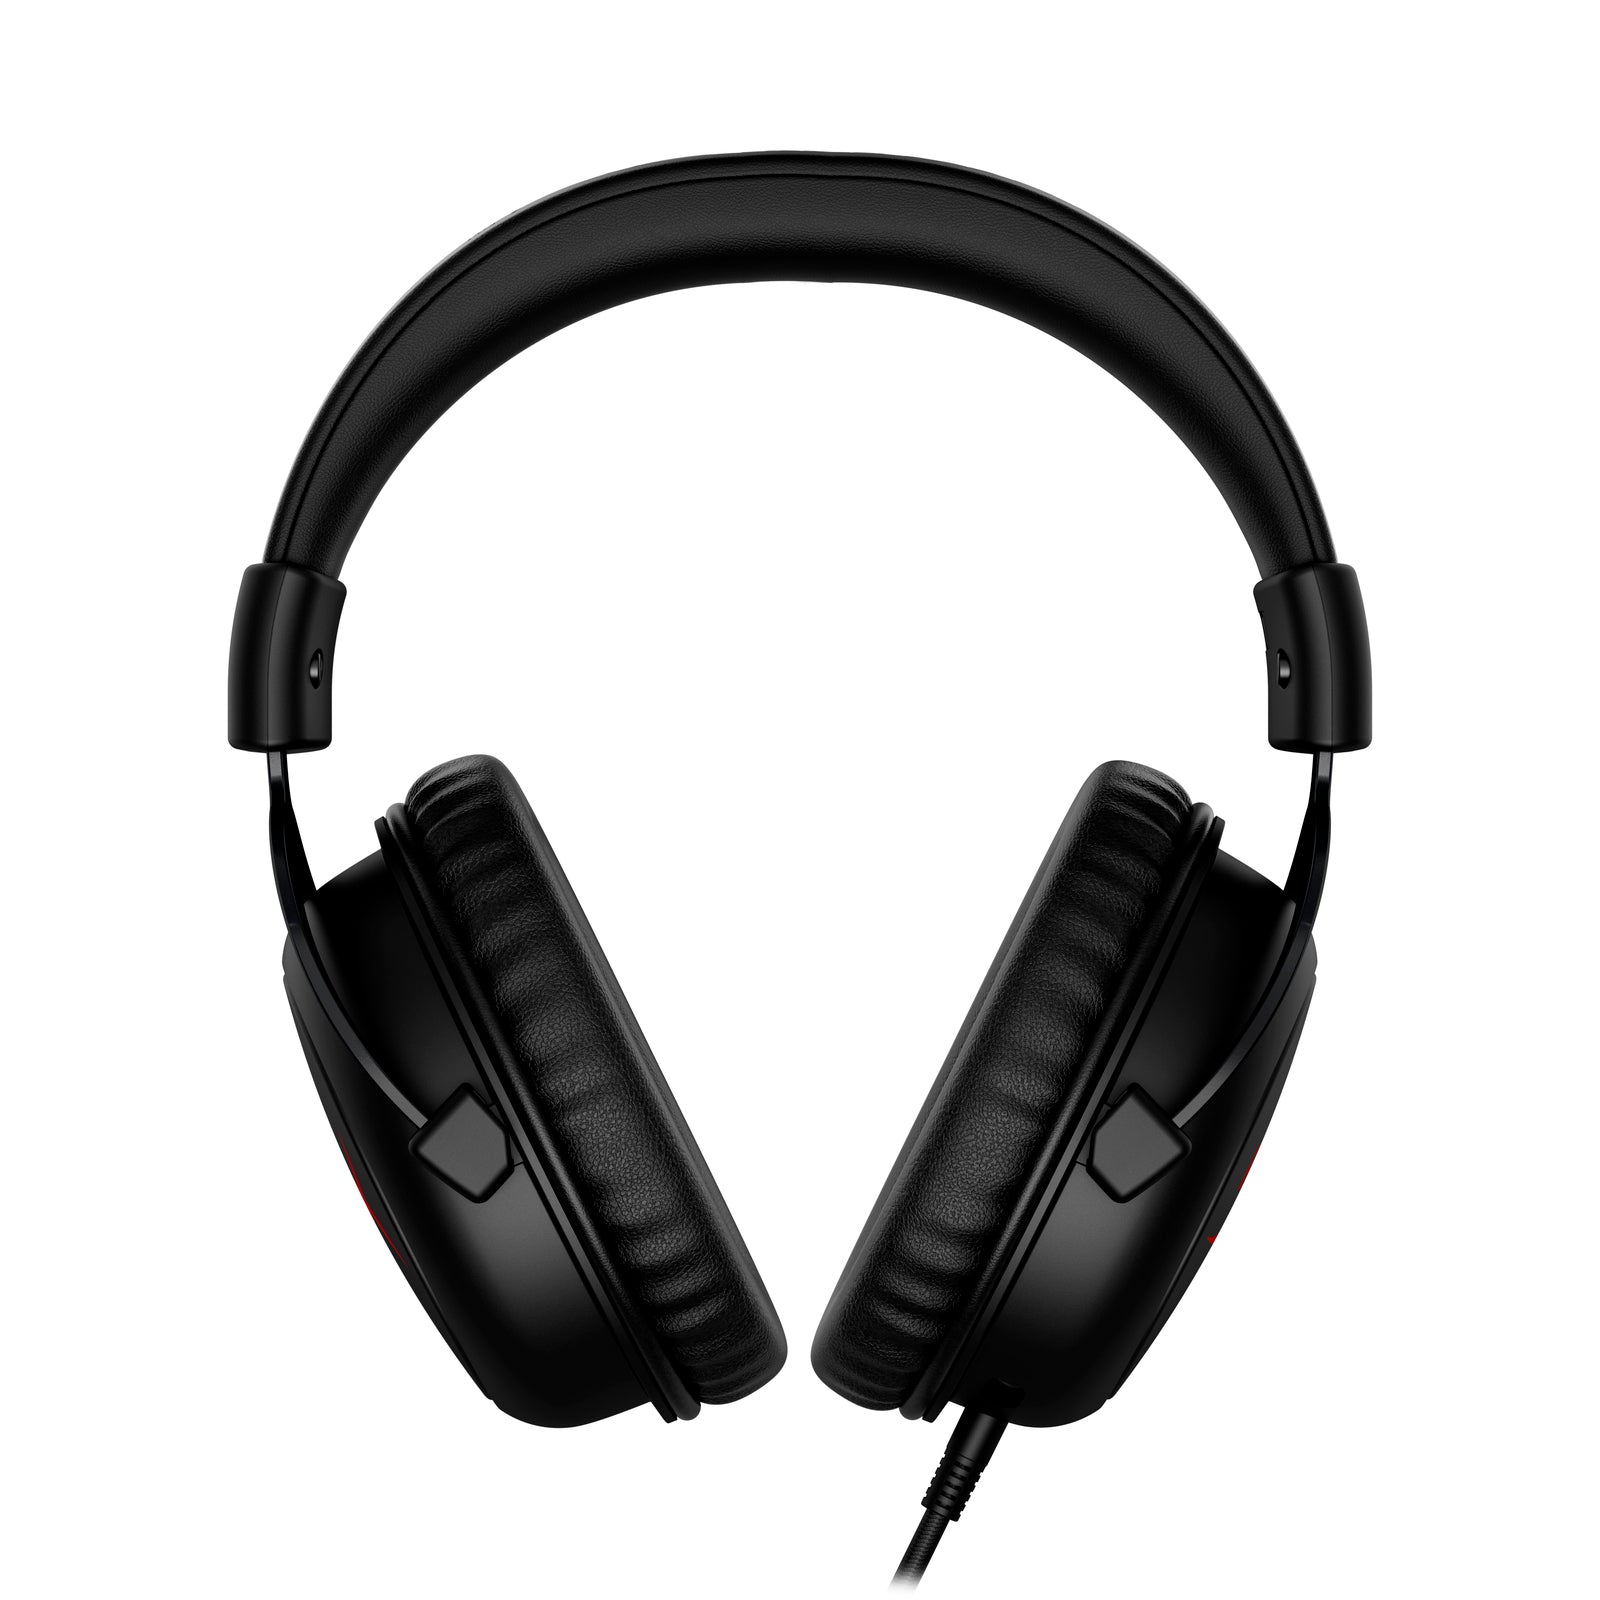 HyperX Launches Cloud Core Wireless Gaming Headset with DTS